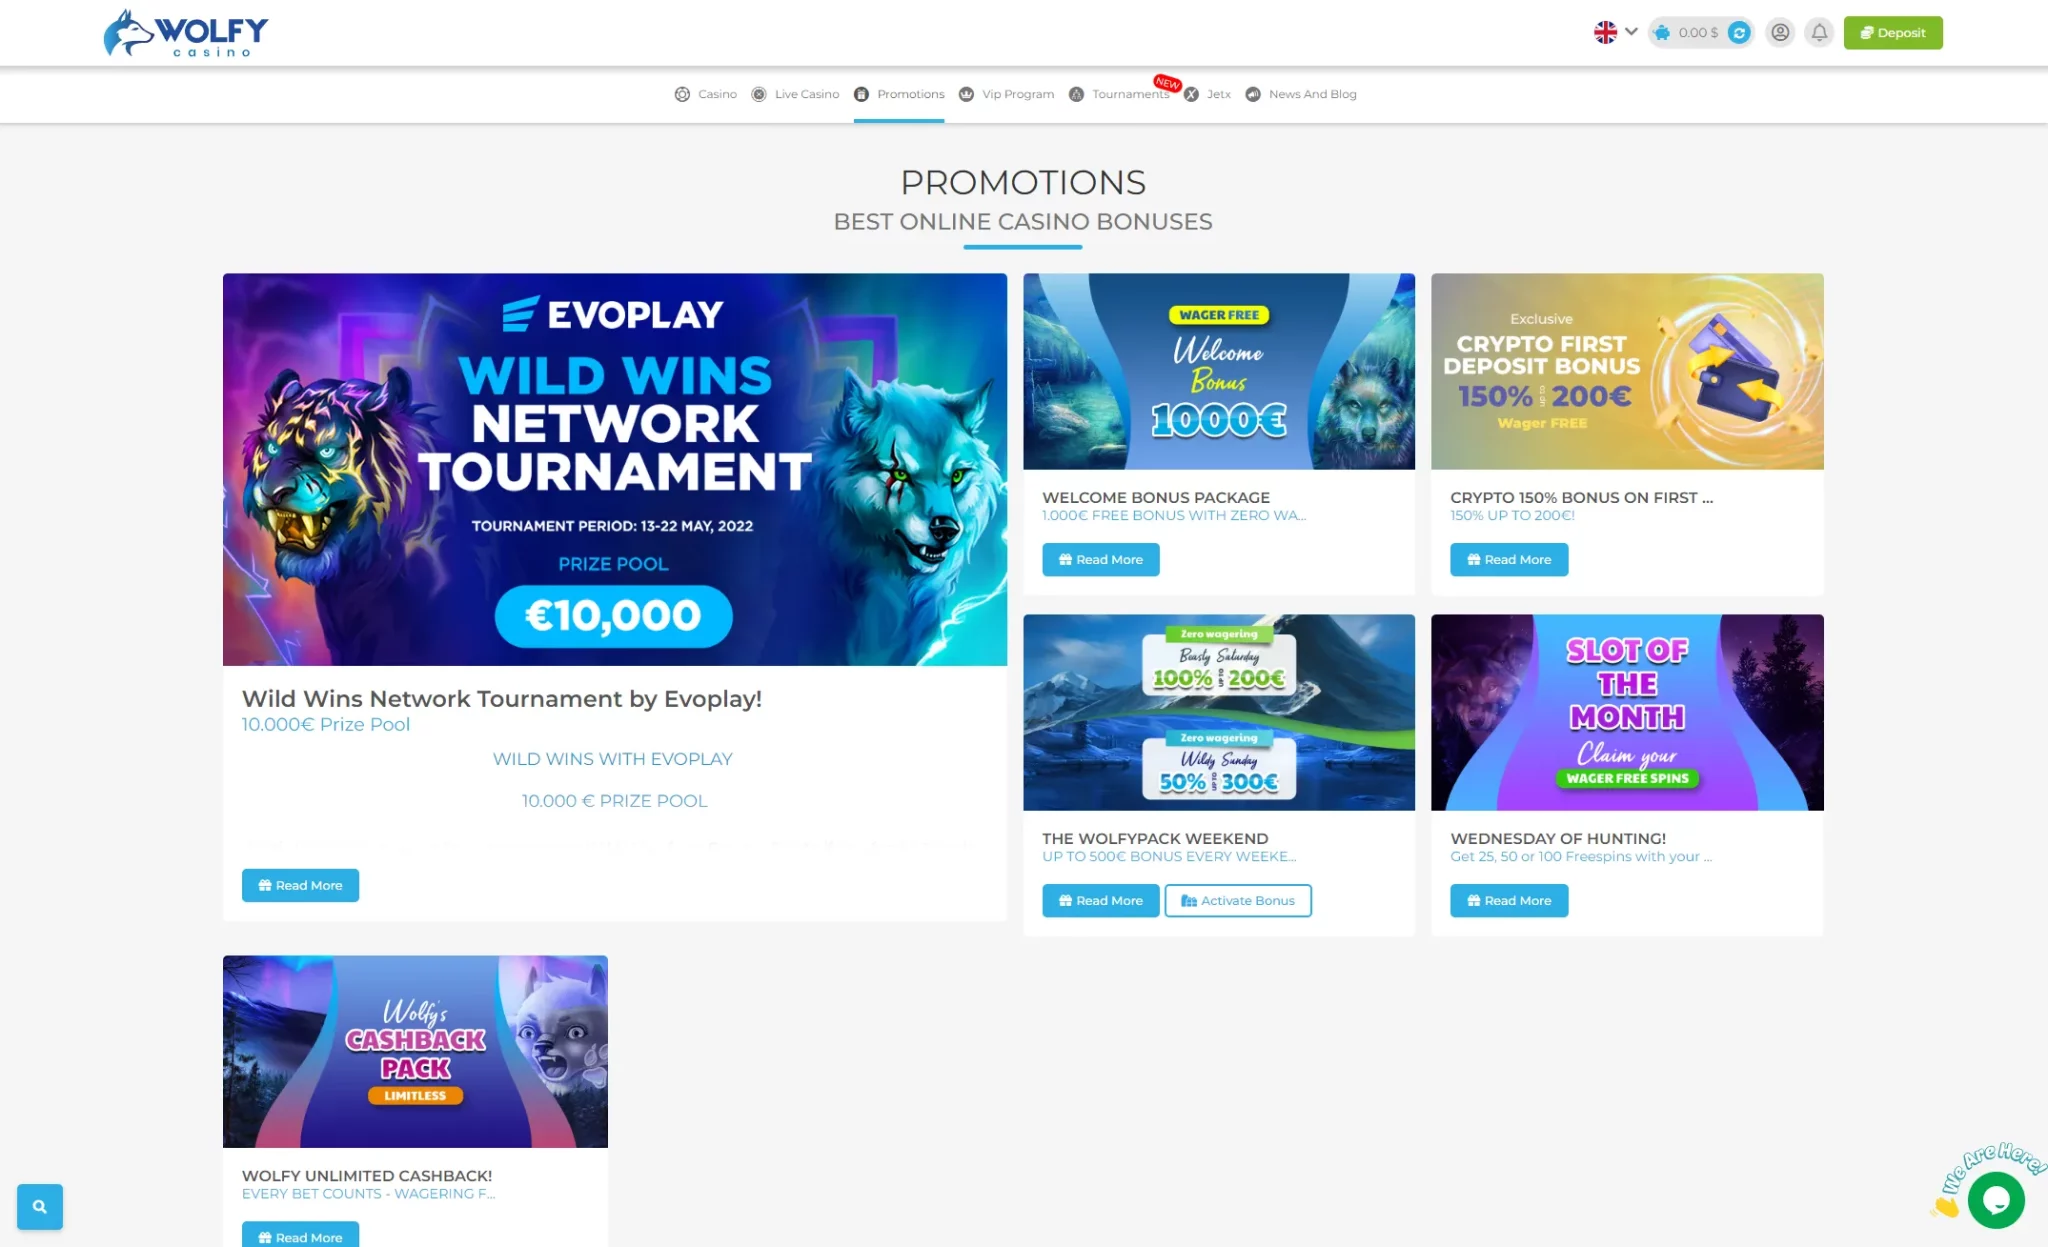 Overview of Wolfy casino different casino promotions